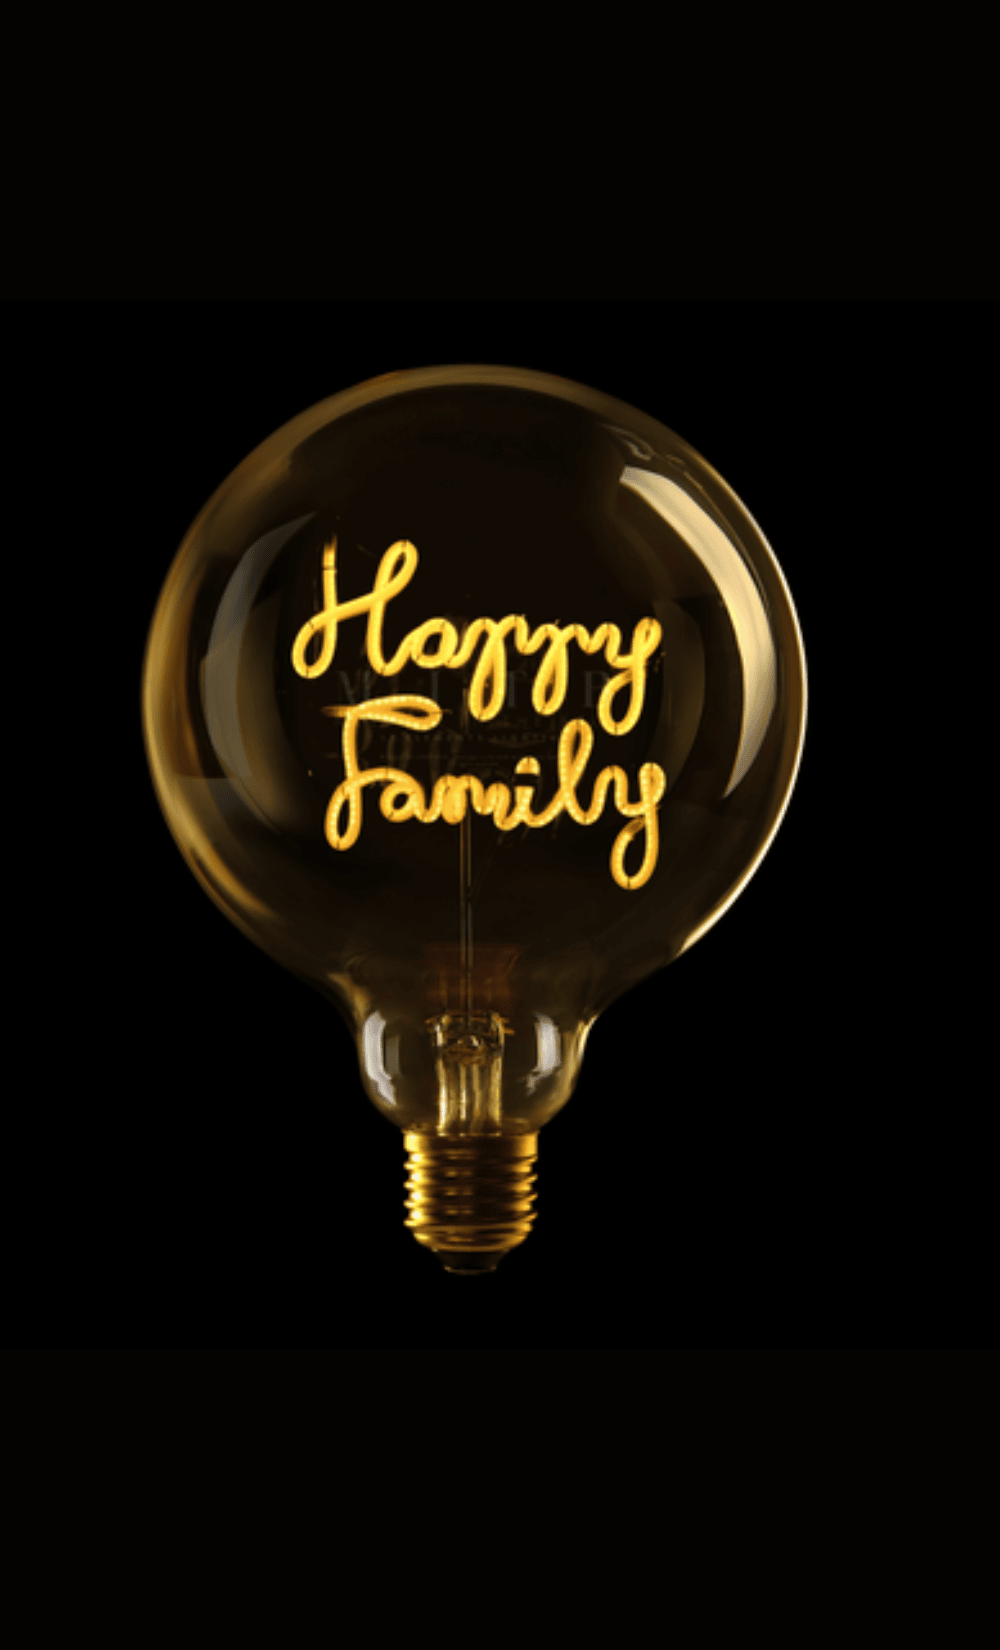 trinity-message-in-the-bulb-happy-family